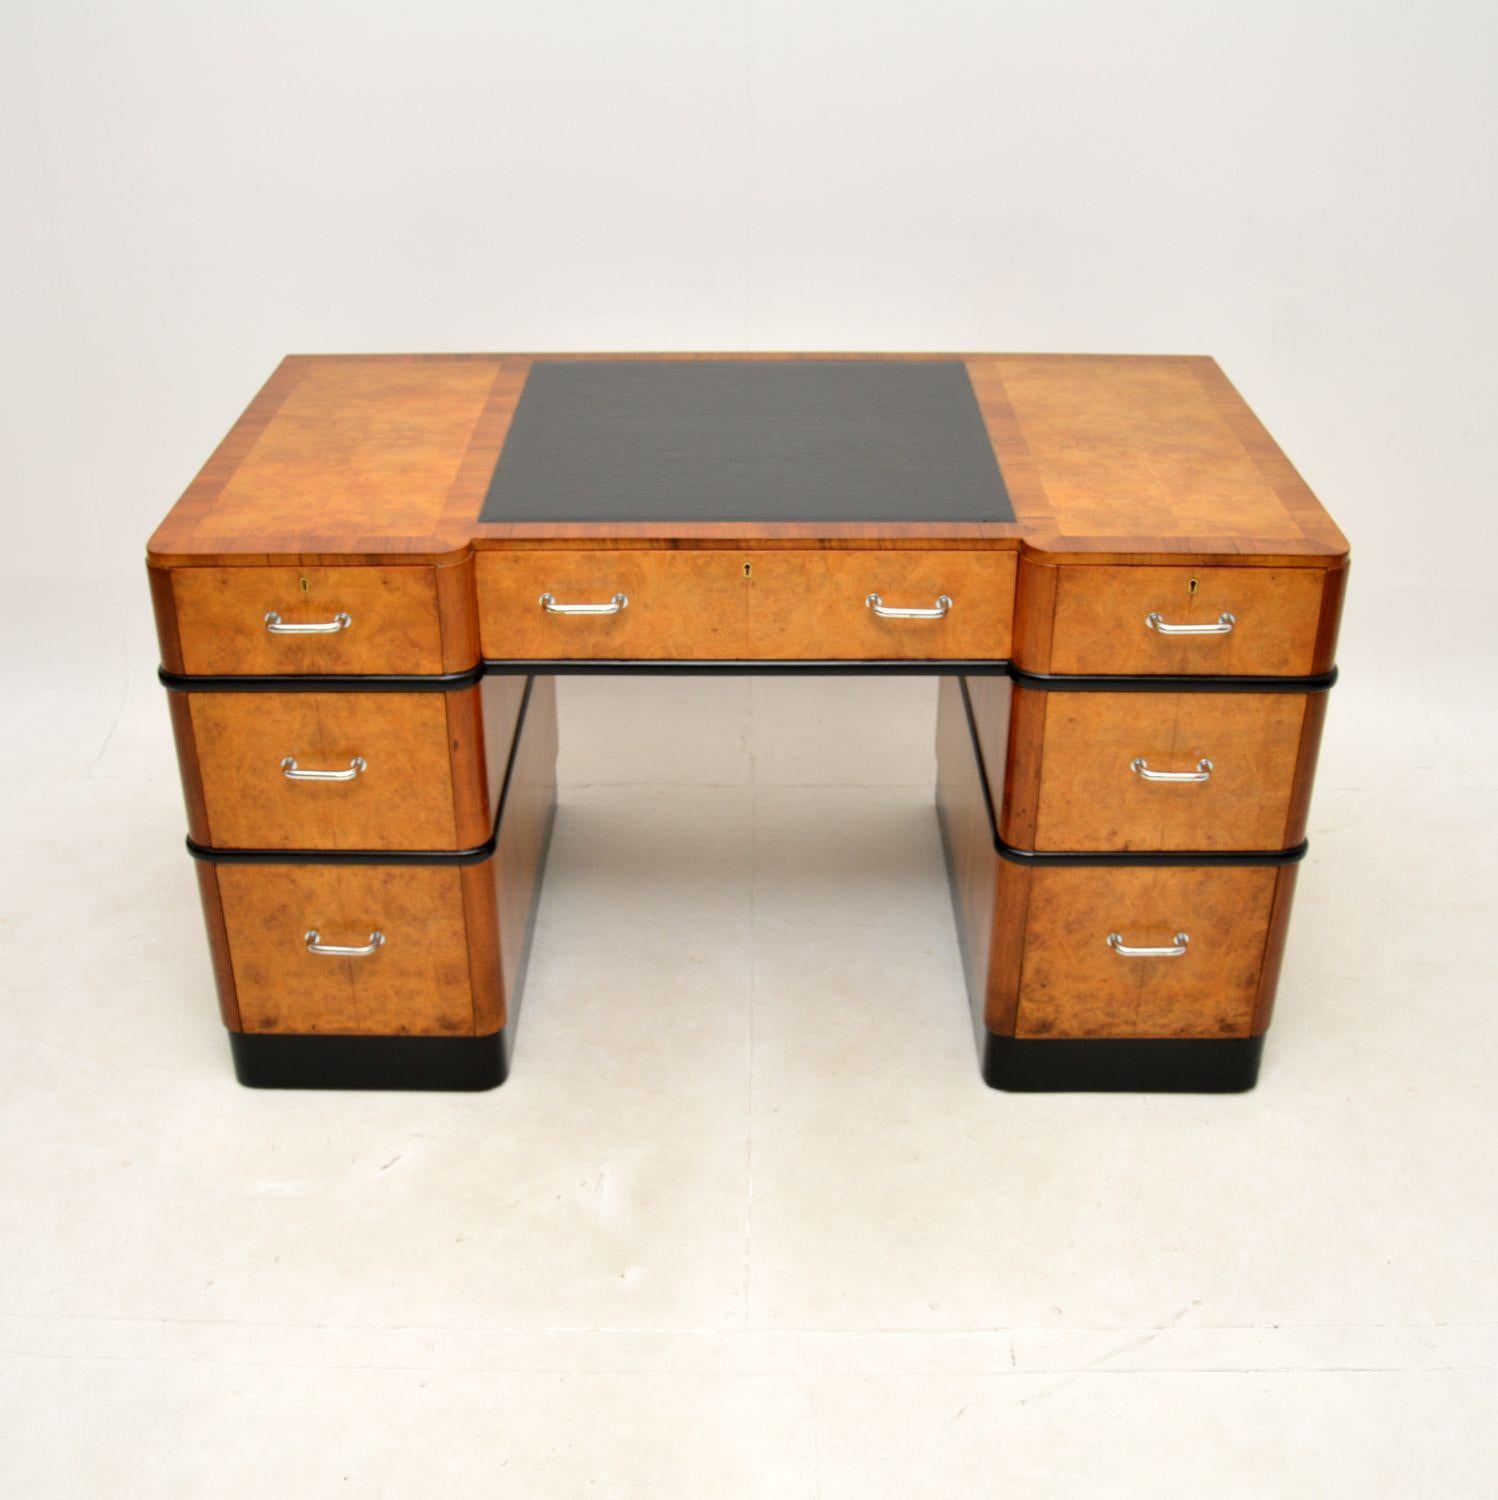 A magnificent Art Deco burr walnut pedestal desk. This was made in England, it dates from around the 1920-30’s.

The quality is outstanding, this is a large and impressive size. There are beautiful burr walnut grain patterns on the top and drawer